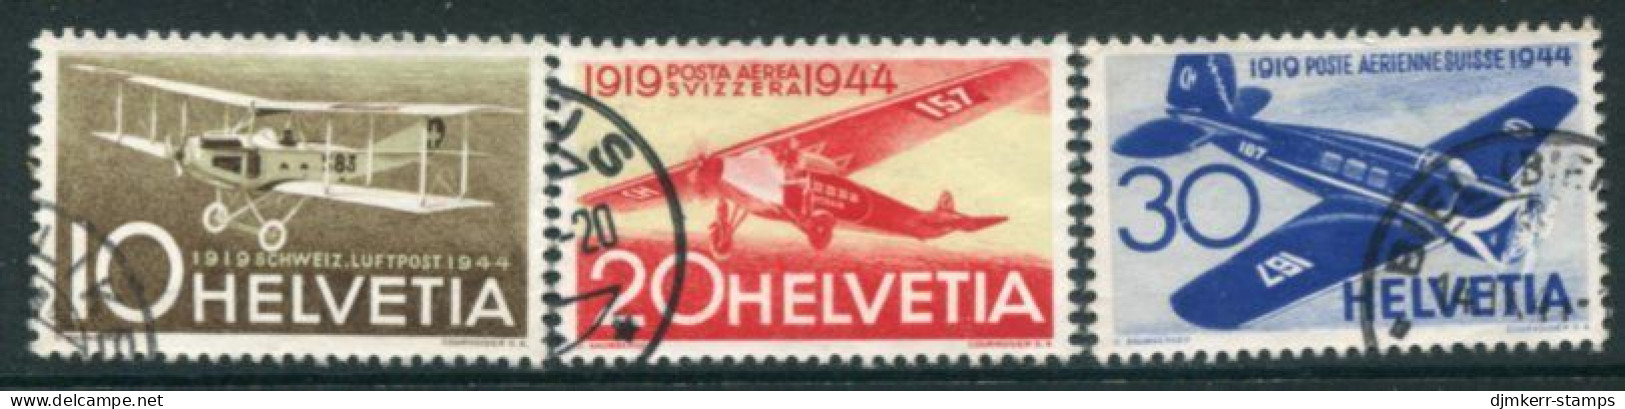 SWITZERLAND 1944 Airmail Anniversary Used. Michel 435-37 - Used Stamps